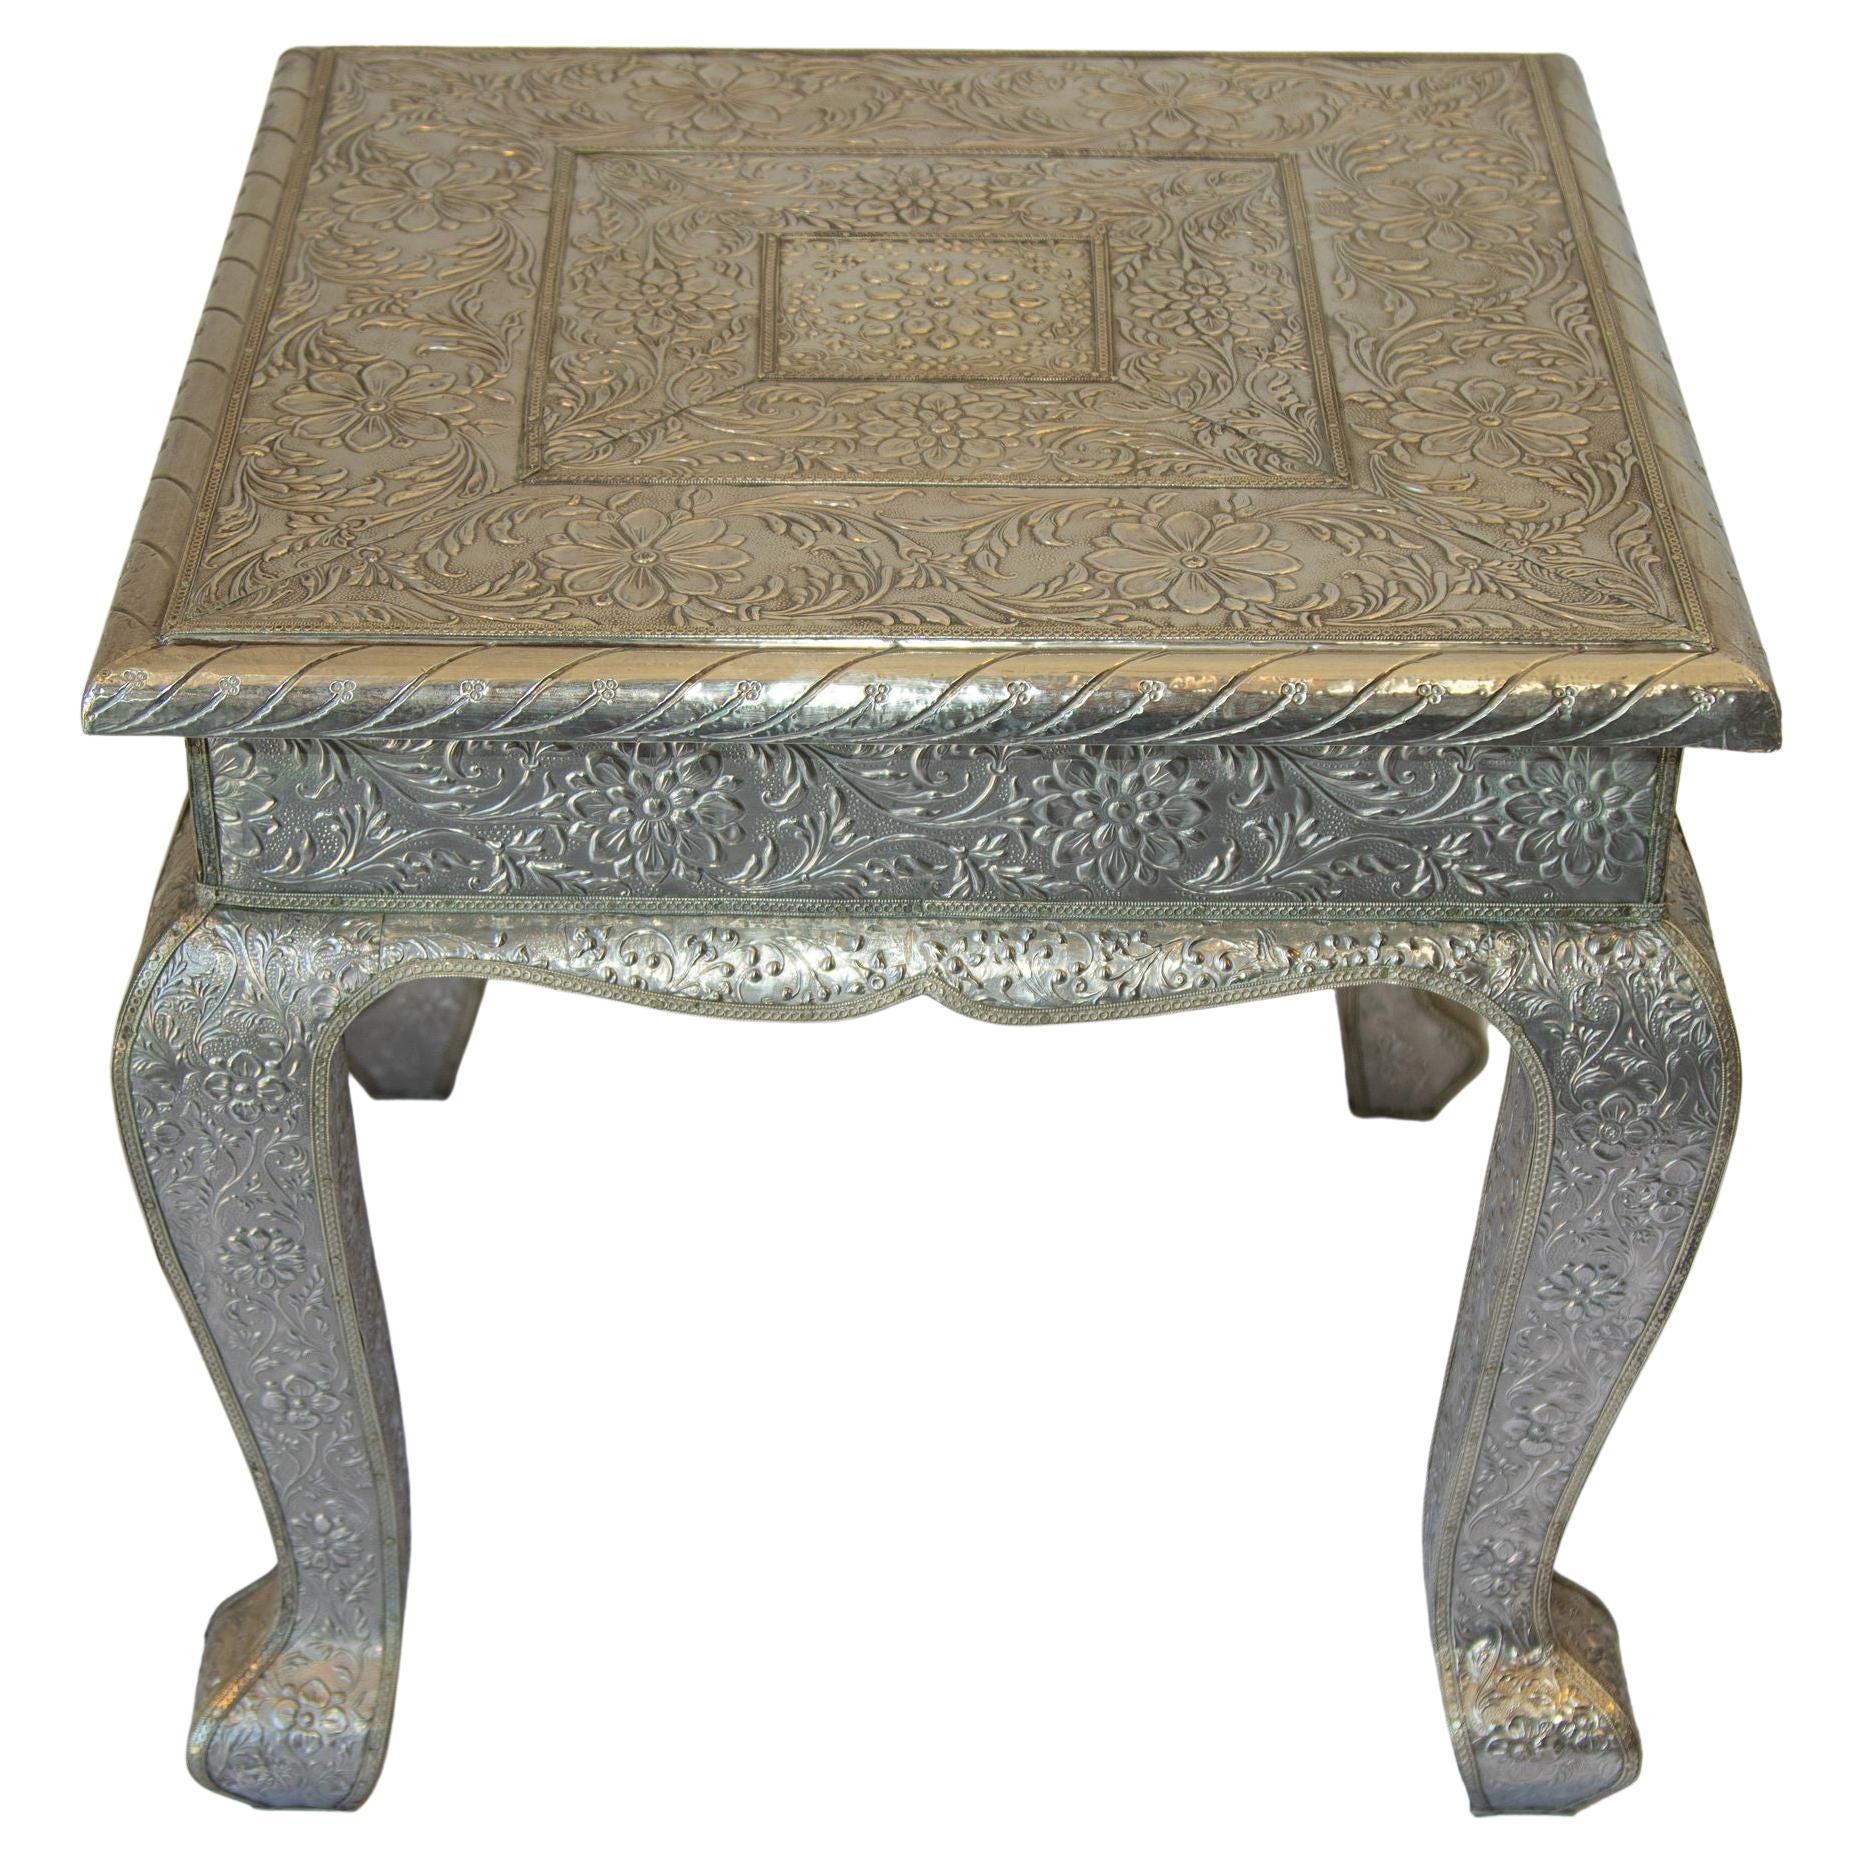 1950 Anglo-Indian Side Clad Silver Wrapped Low Table